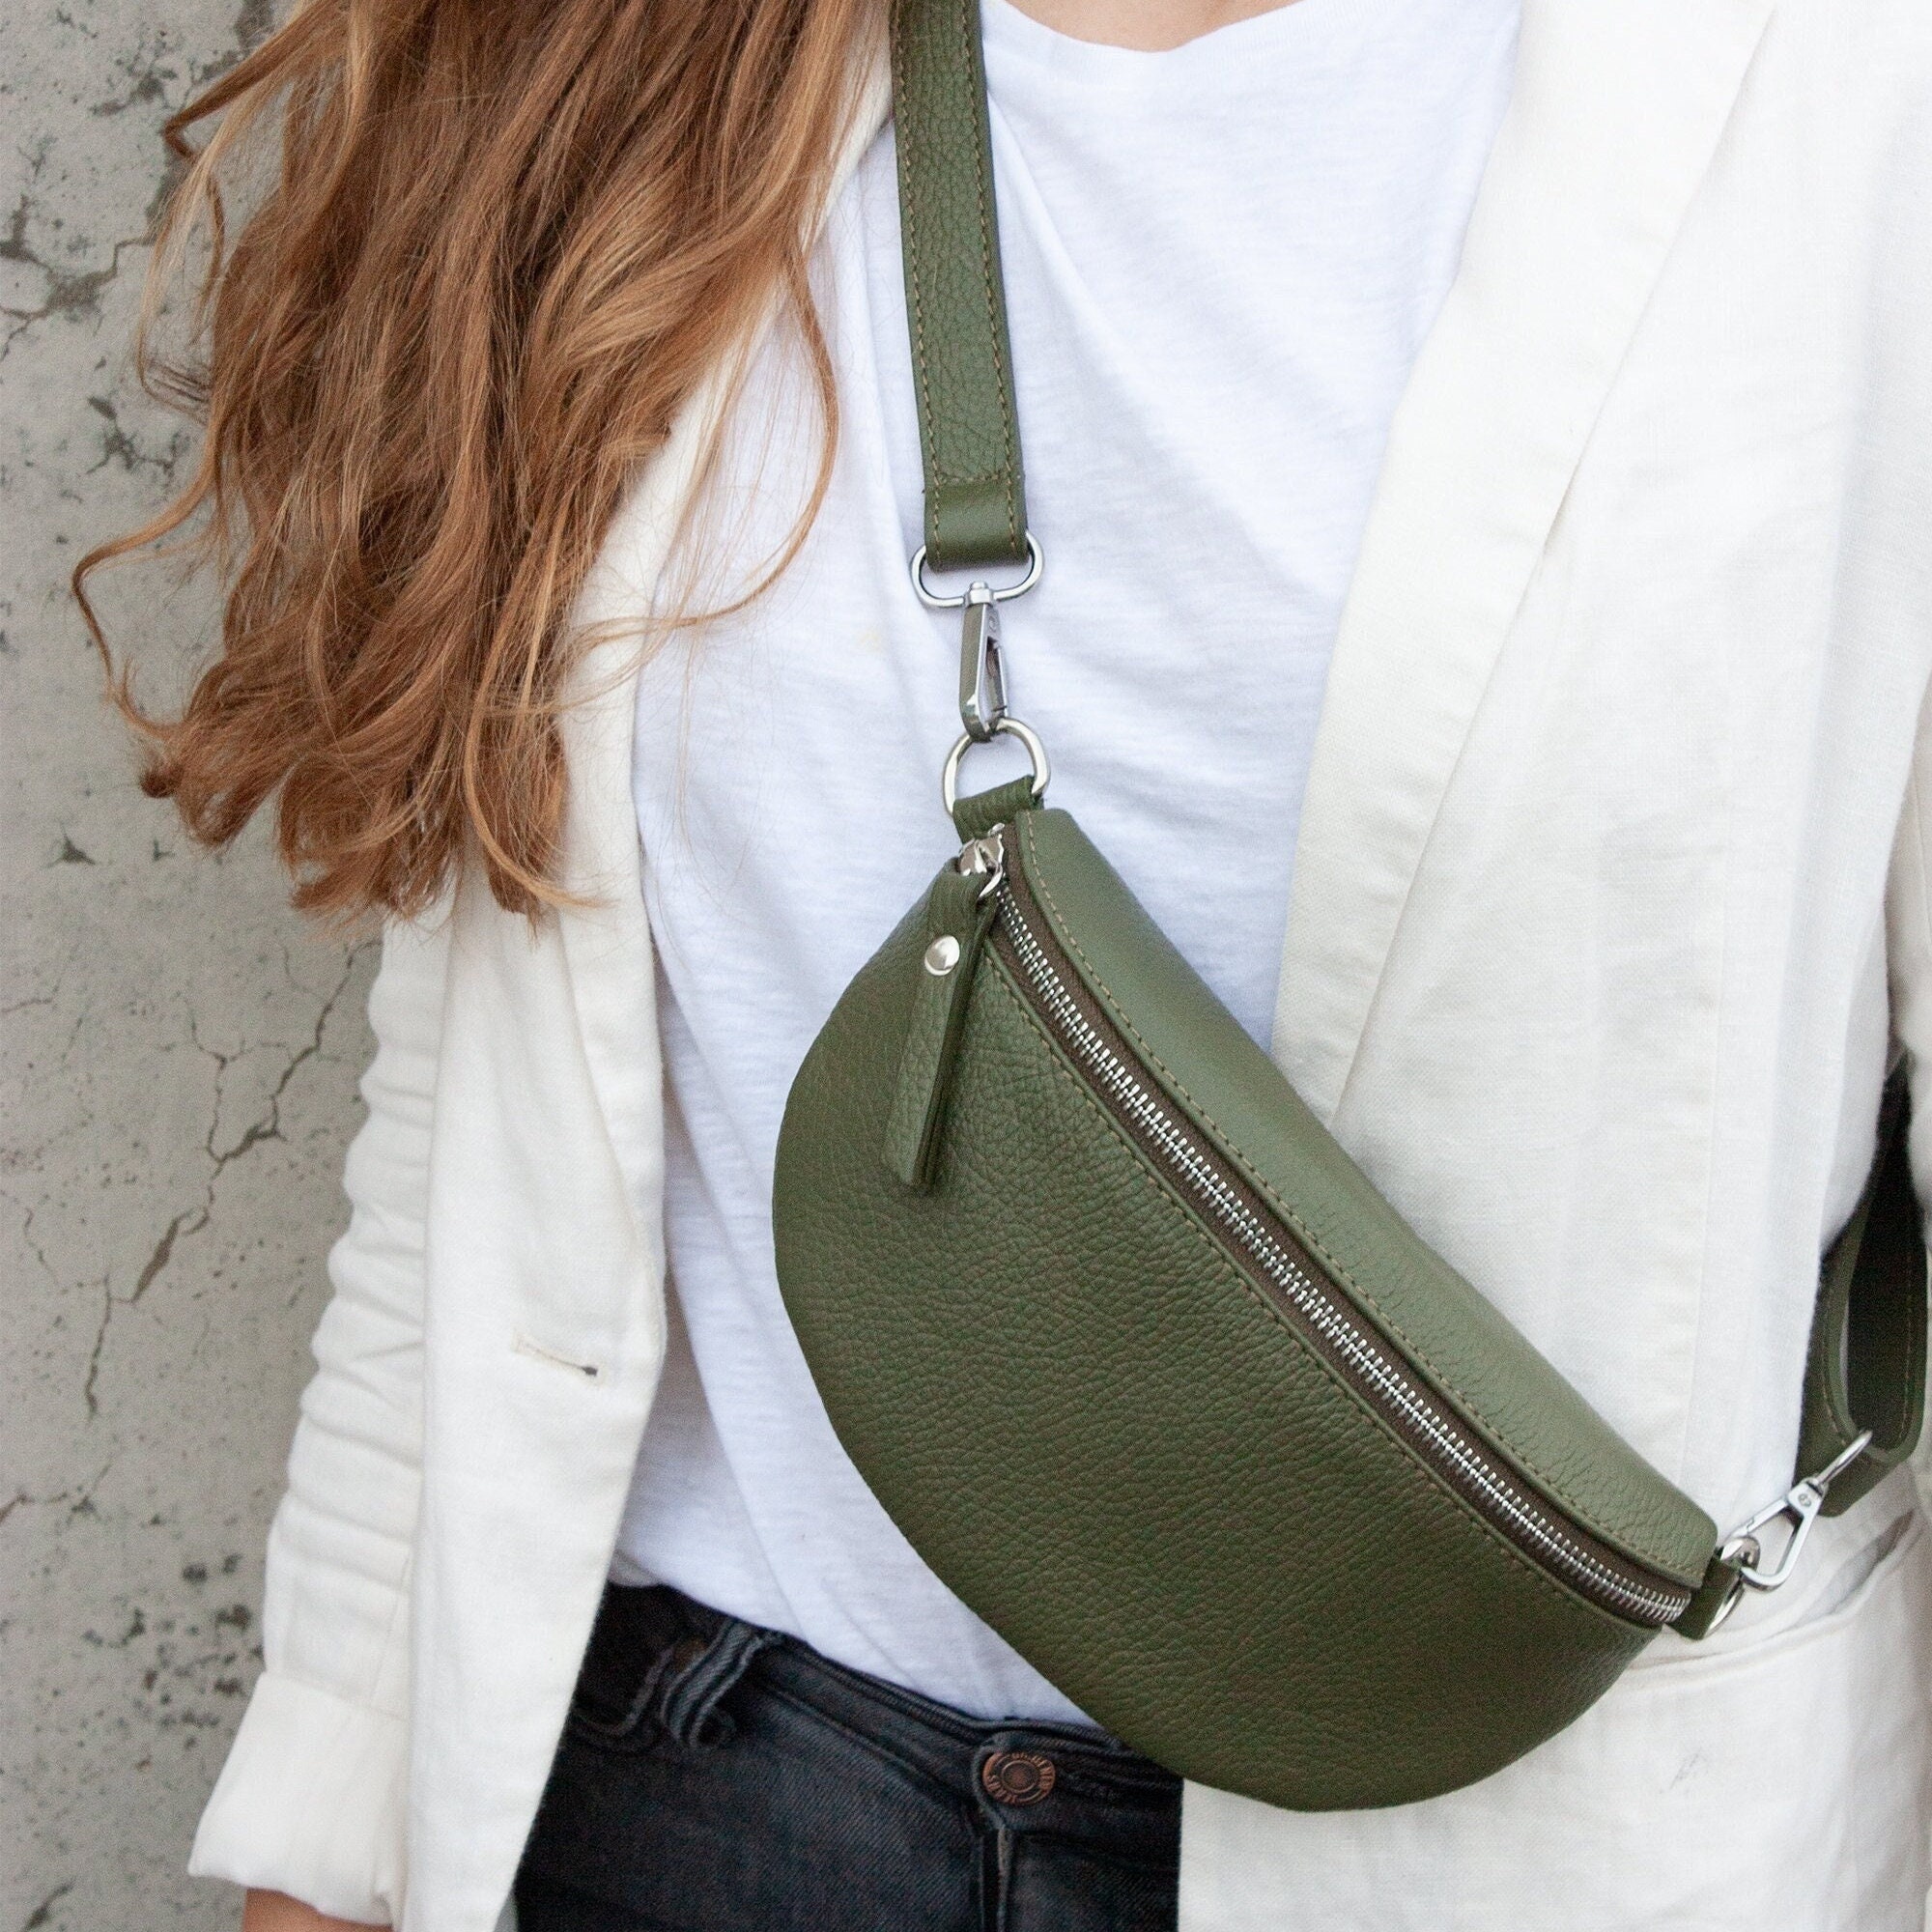 How to Wear a Crossbody Fanny Pack